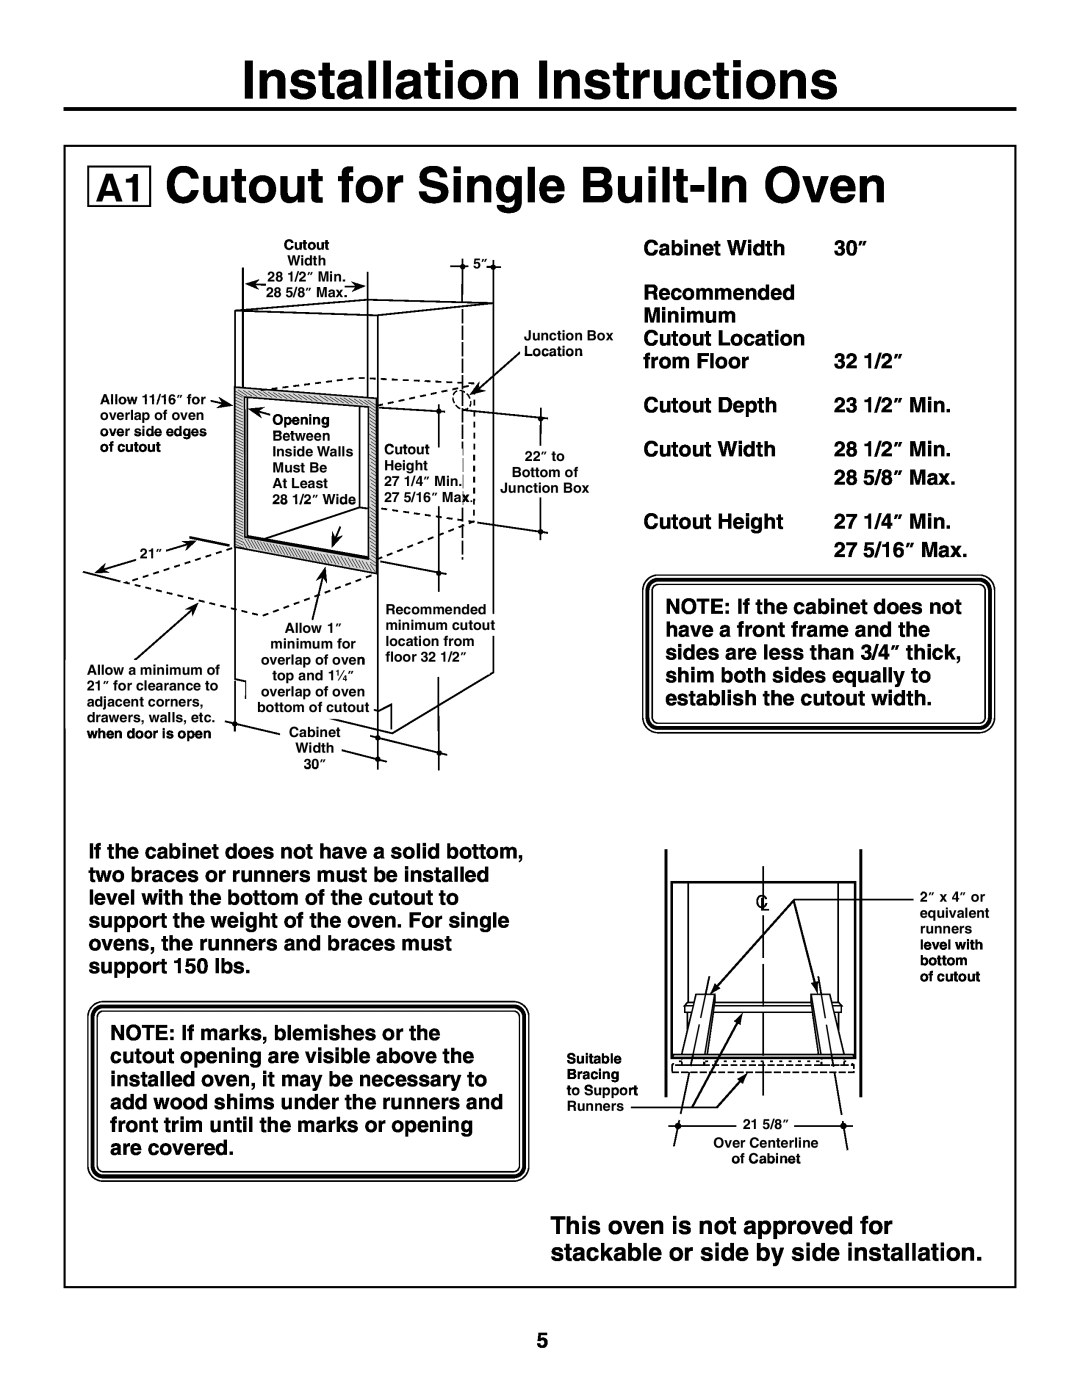 GE JTP20 installation instructions Cutout for Single Built-In Oven, Installation Instructions 